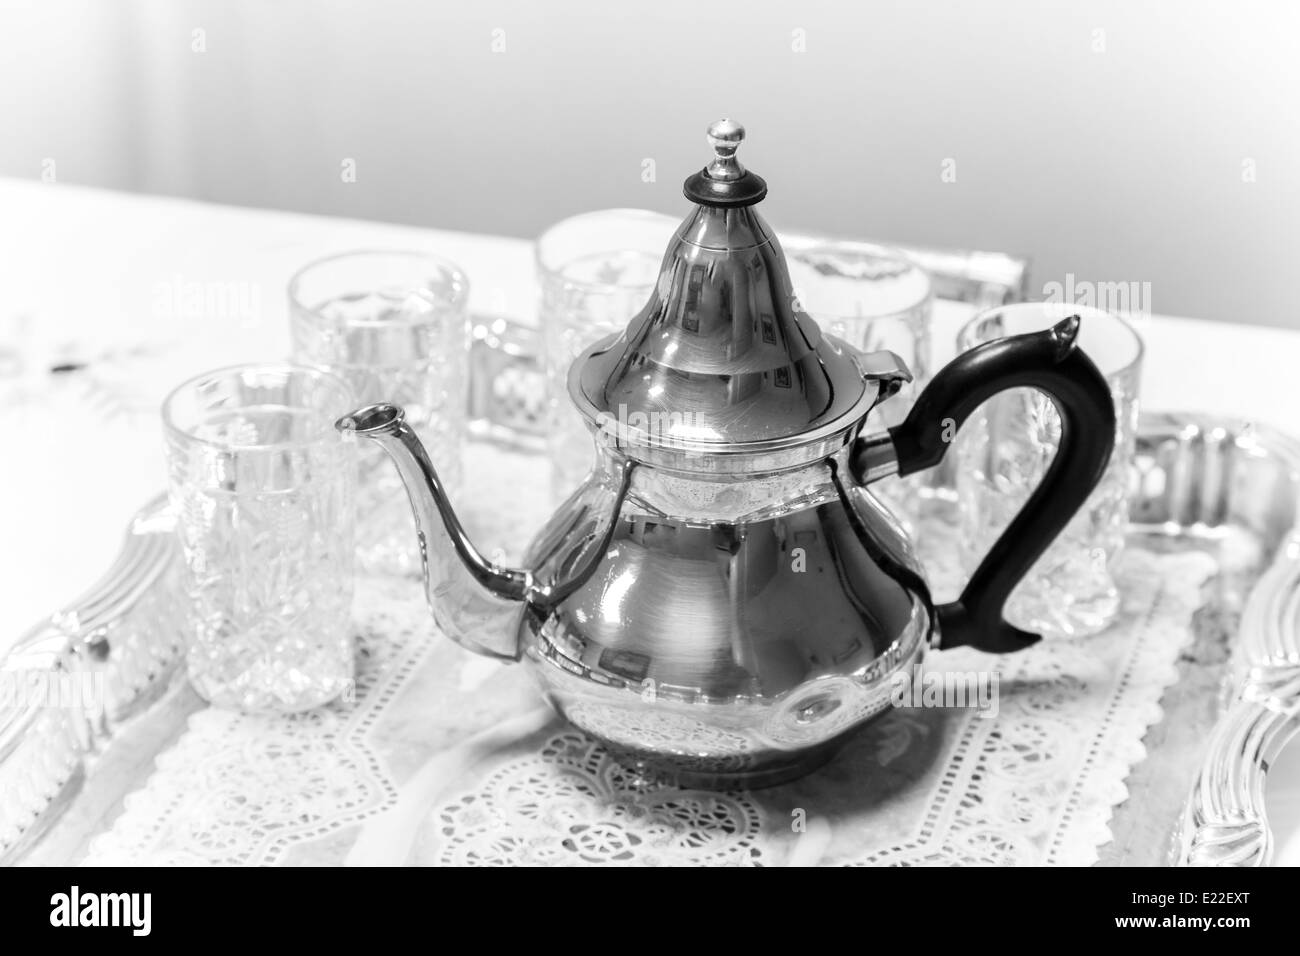 Arabic Teapot High Resolution Stock Photography and Images - Alamy